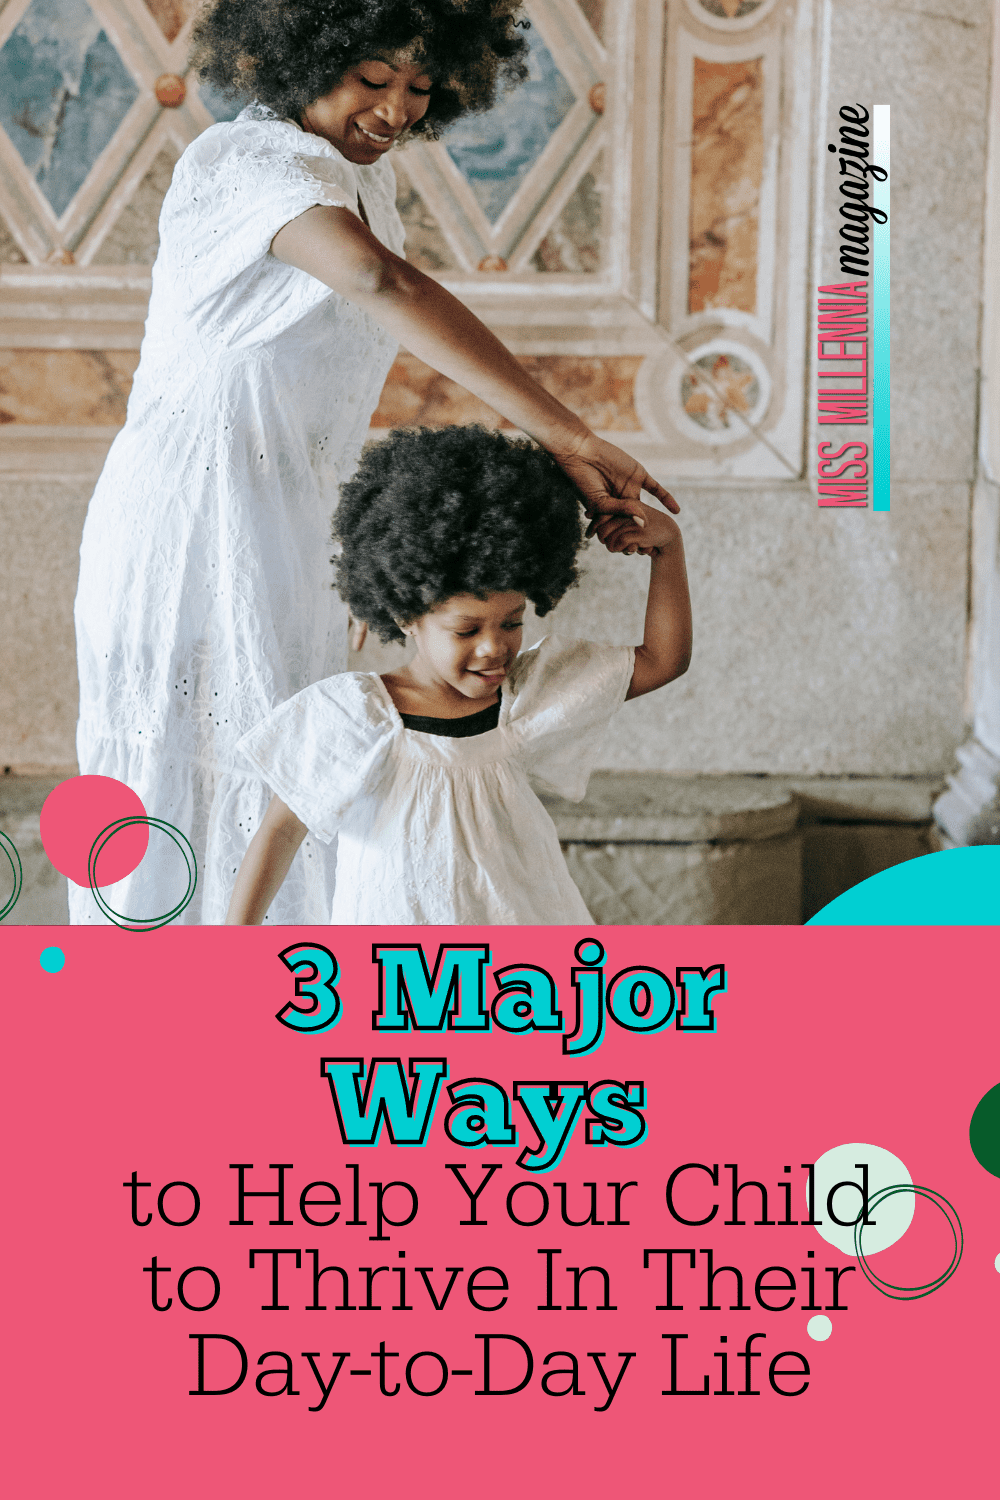 3 Major Ways to Help Your Child to Thrive In Their Day-to-Day Life